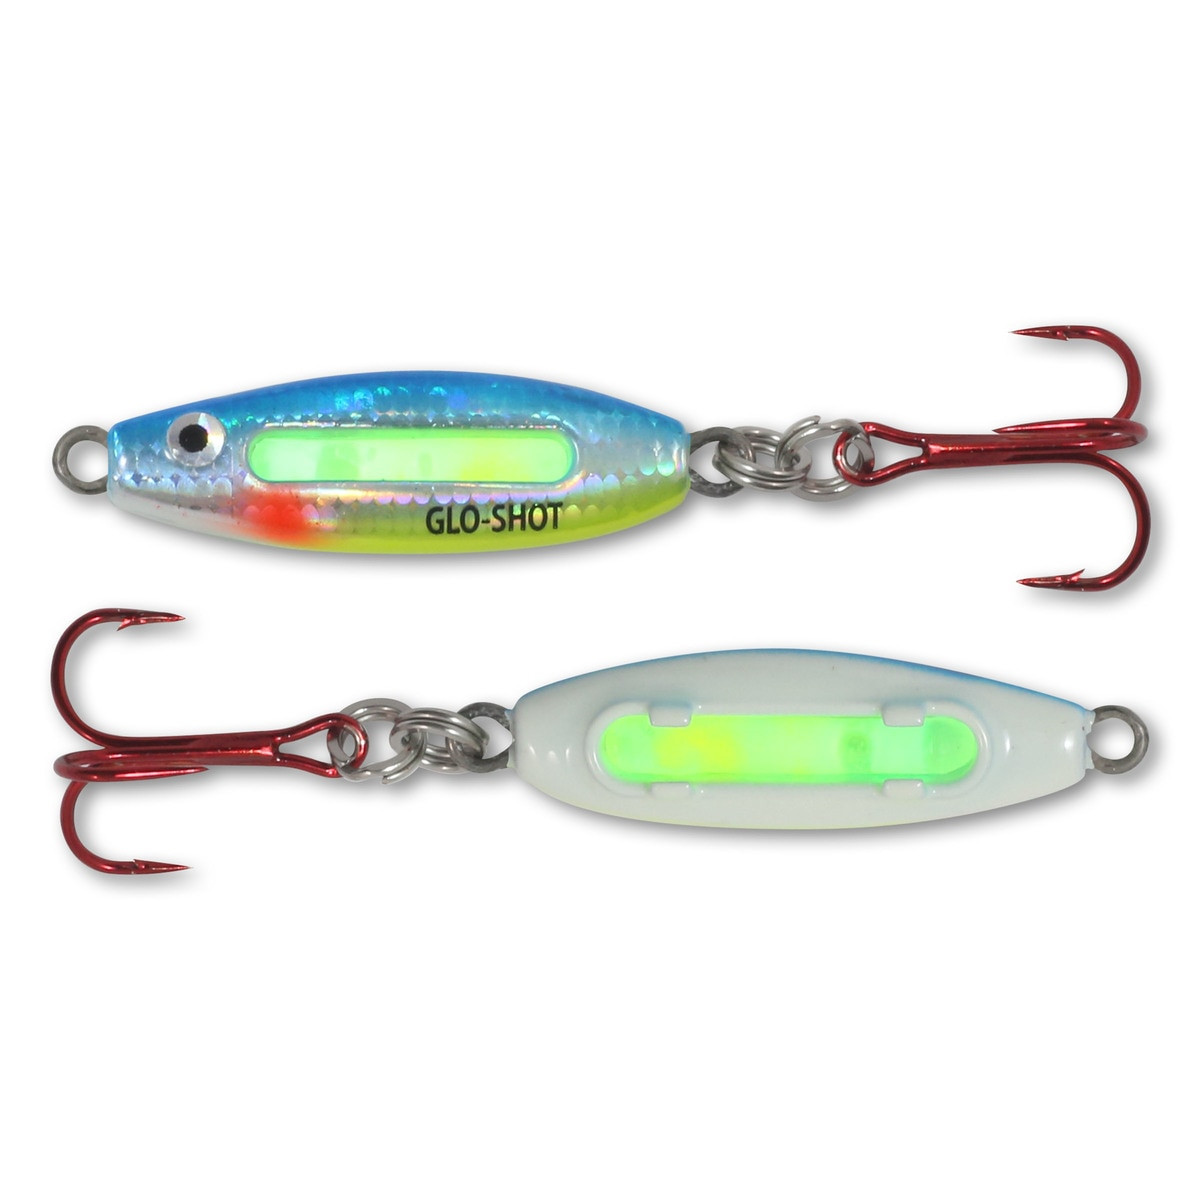 Northland Fishing Tackle Glo-Shot Fire-Belly Spoon - JT Outdoor Products